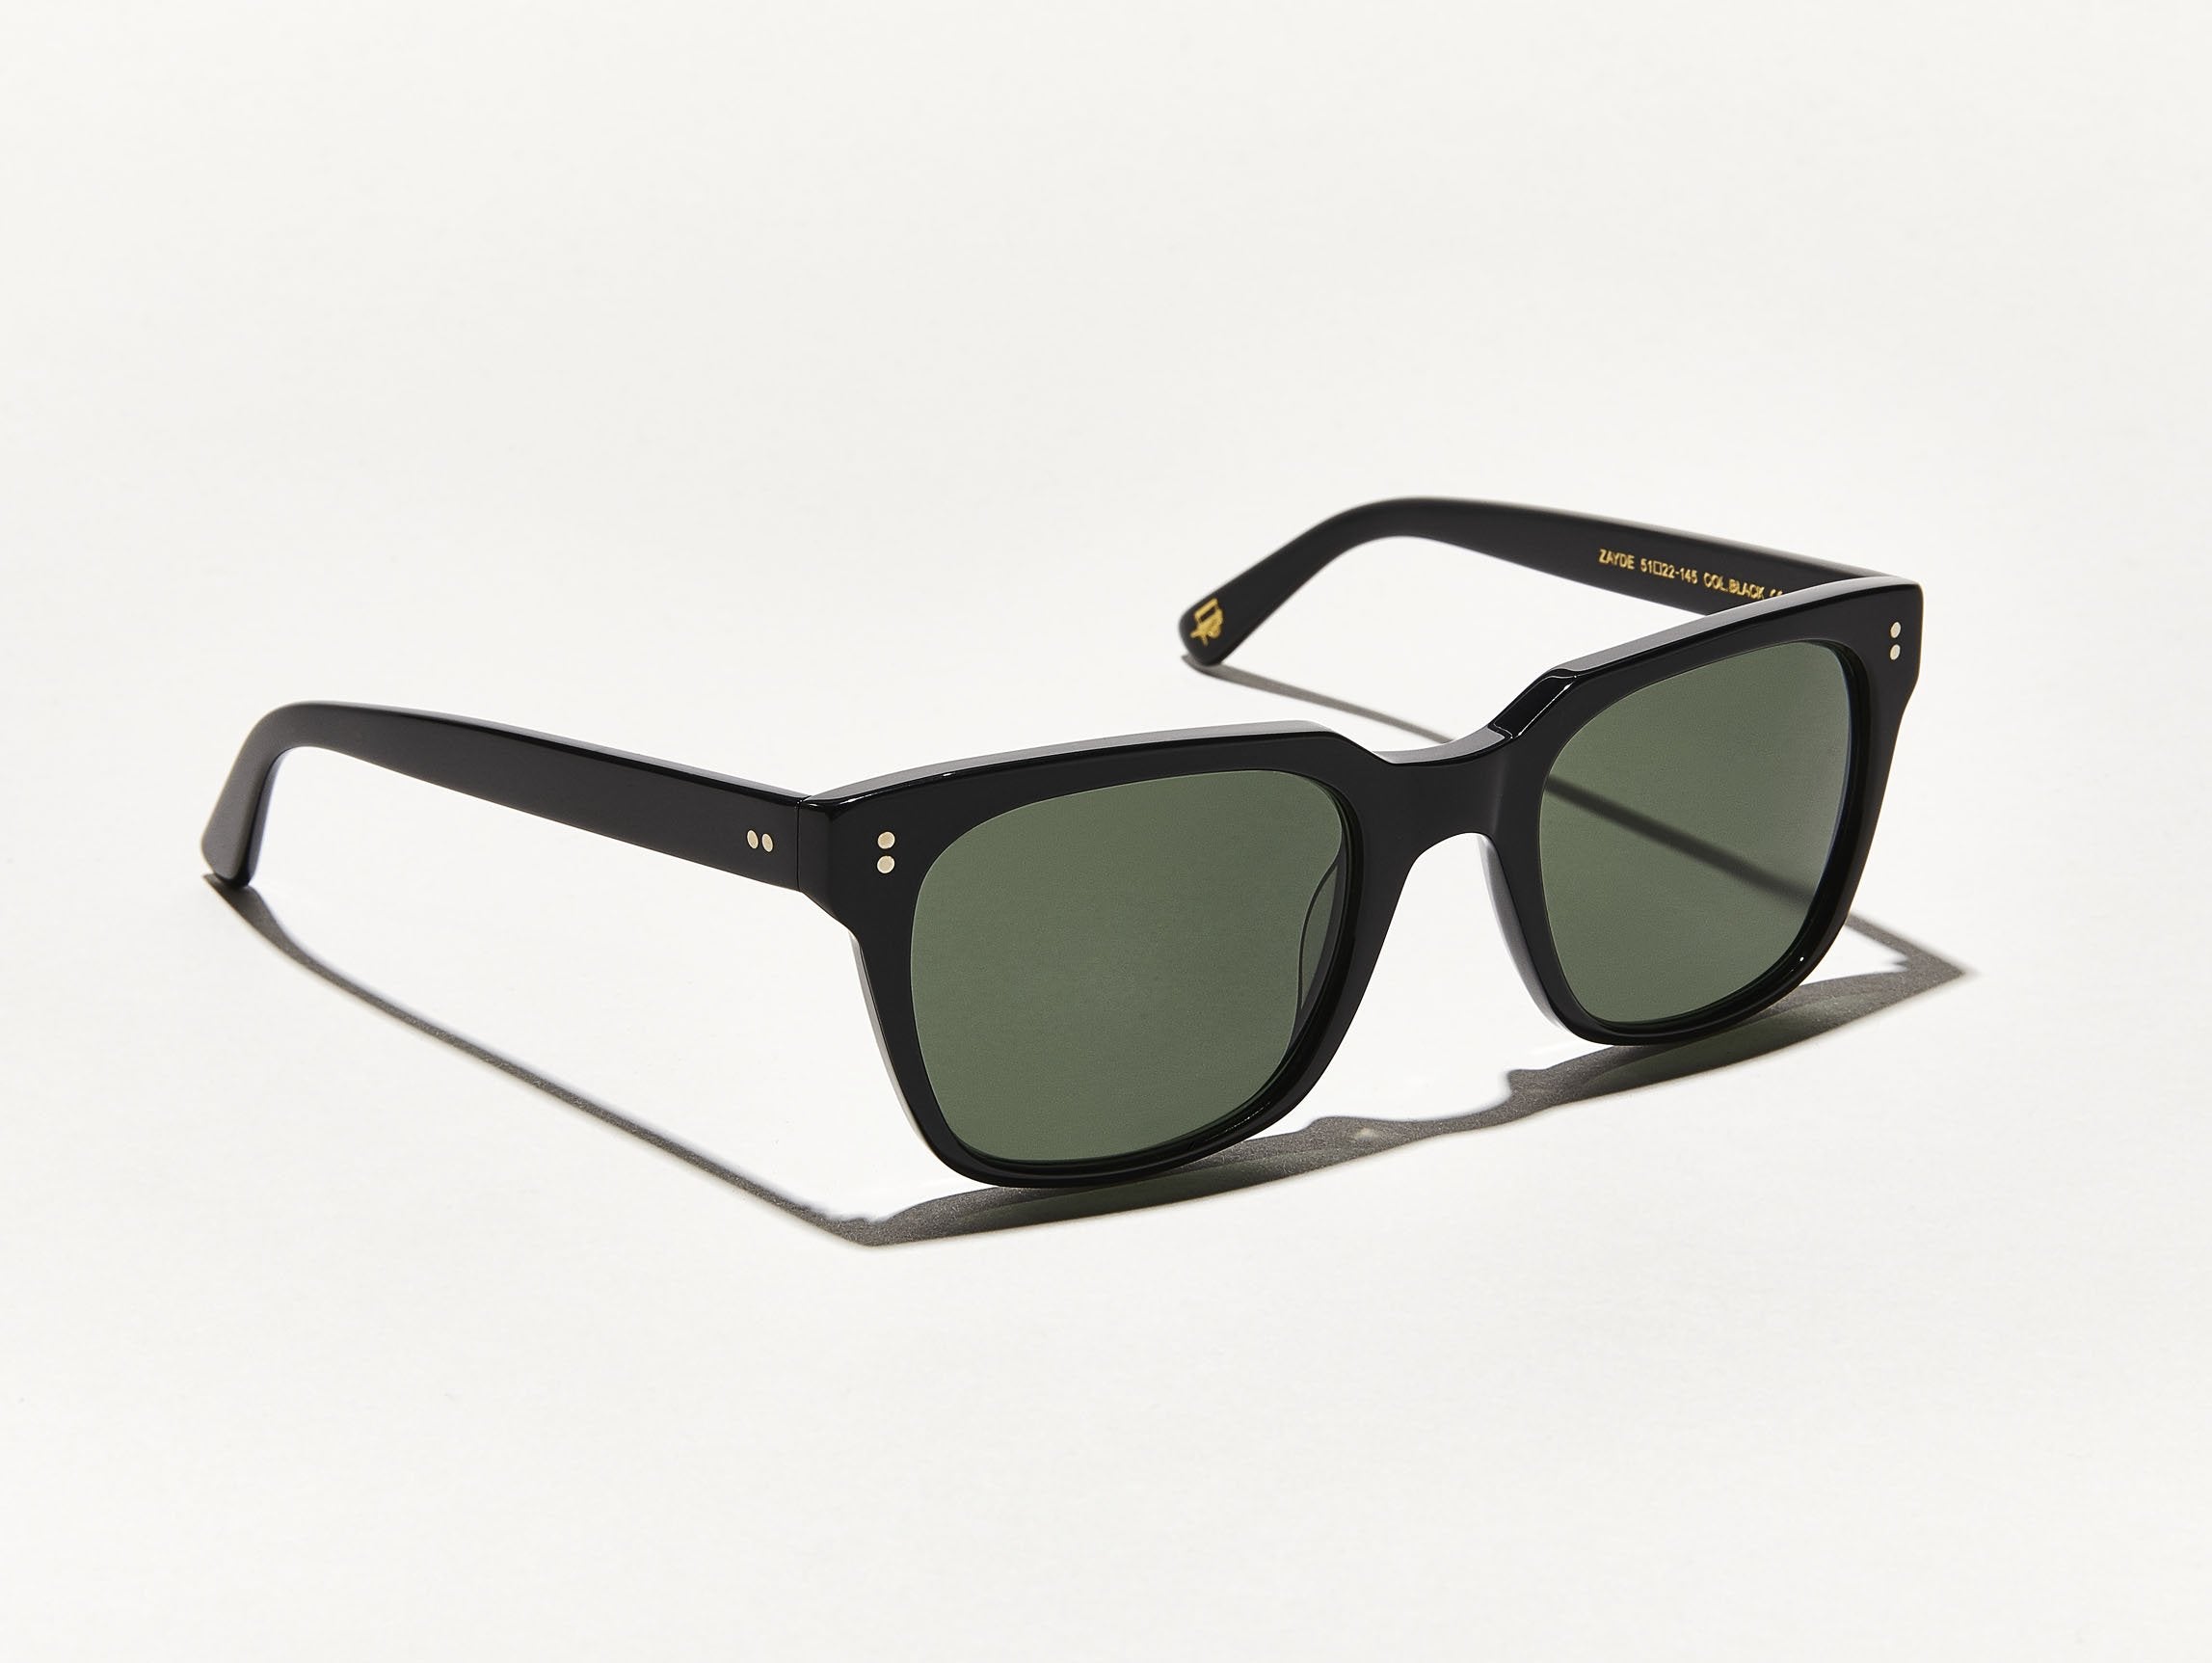 The ZAYDE SUN in Black with Grey Glass Lenses